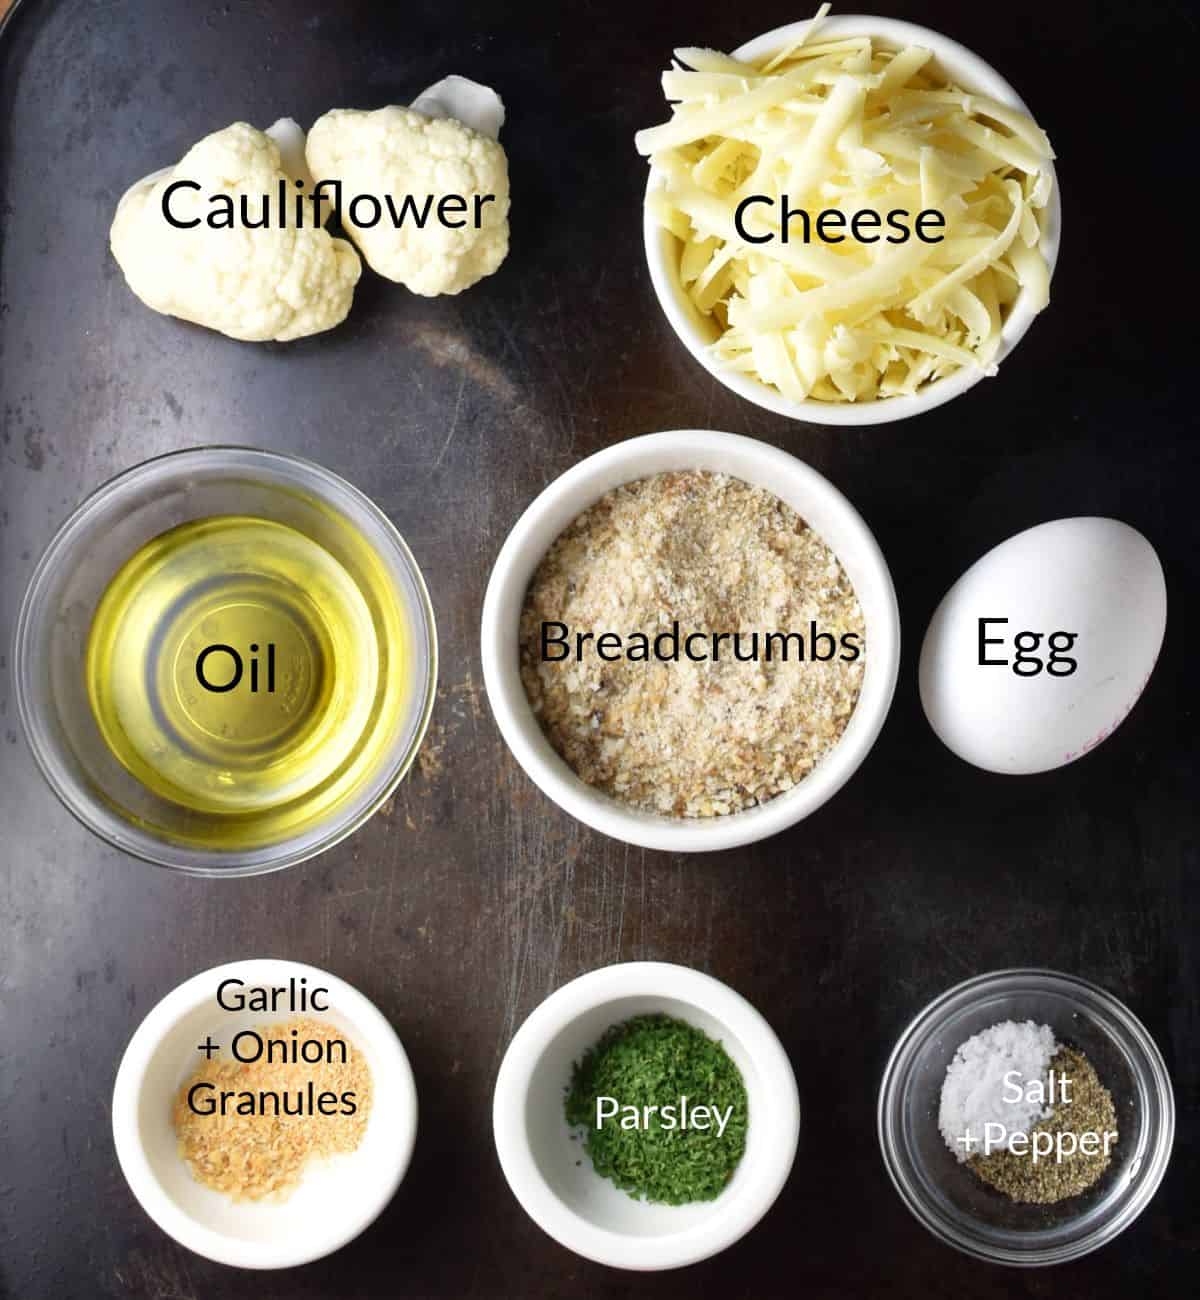 Ingredients for making cauliflower patties in individual dishes.